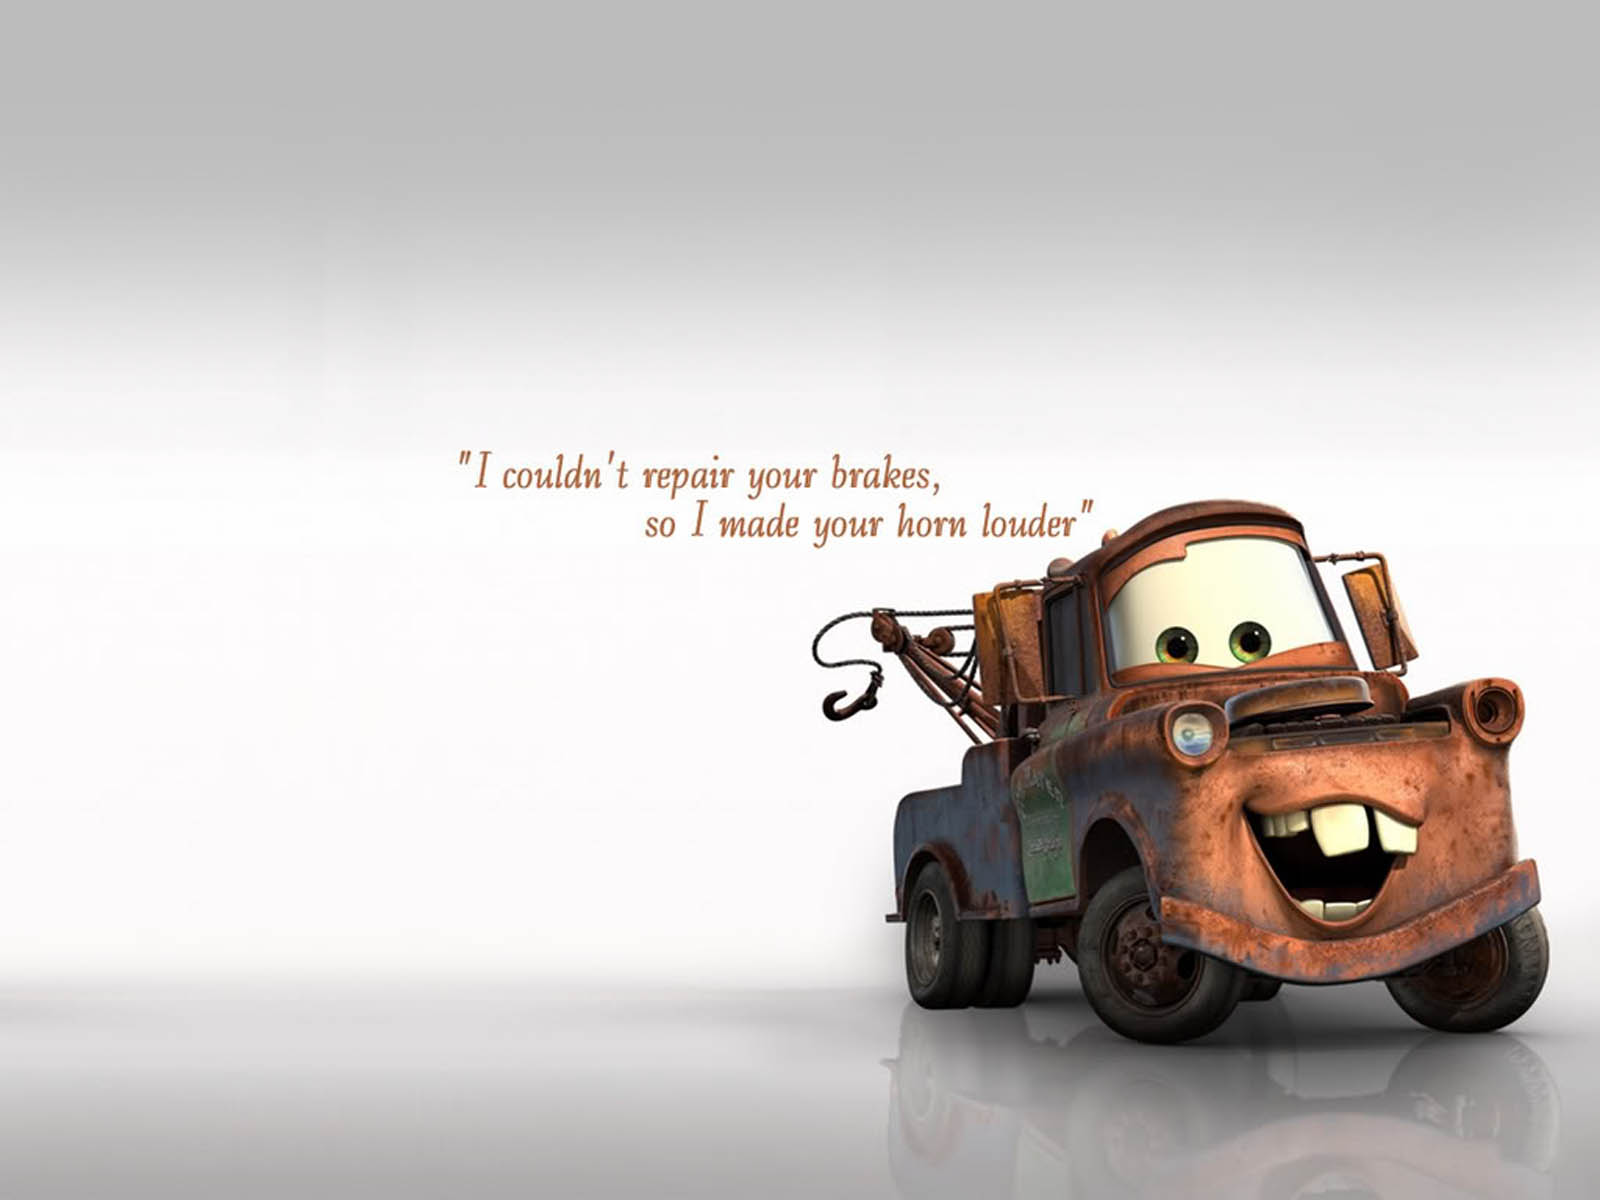 Cute Love Quote Wallpaper High Definition Quality Widescreen